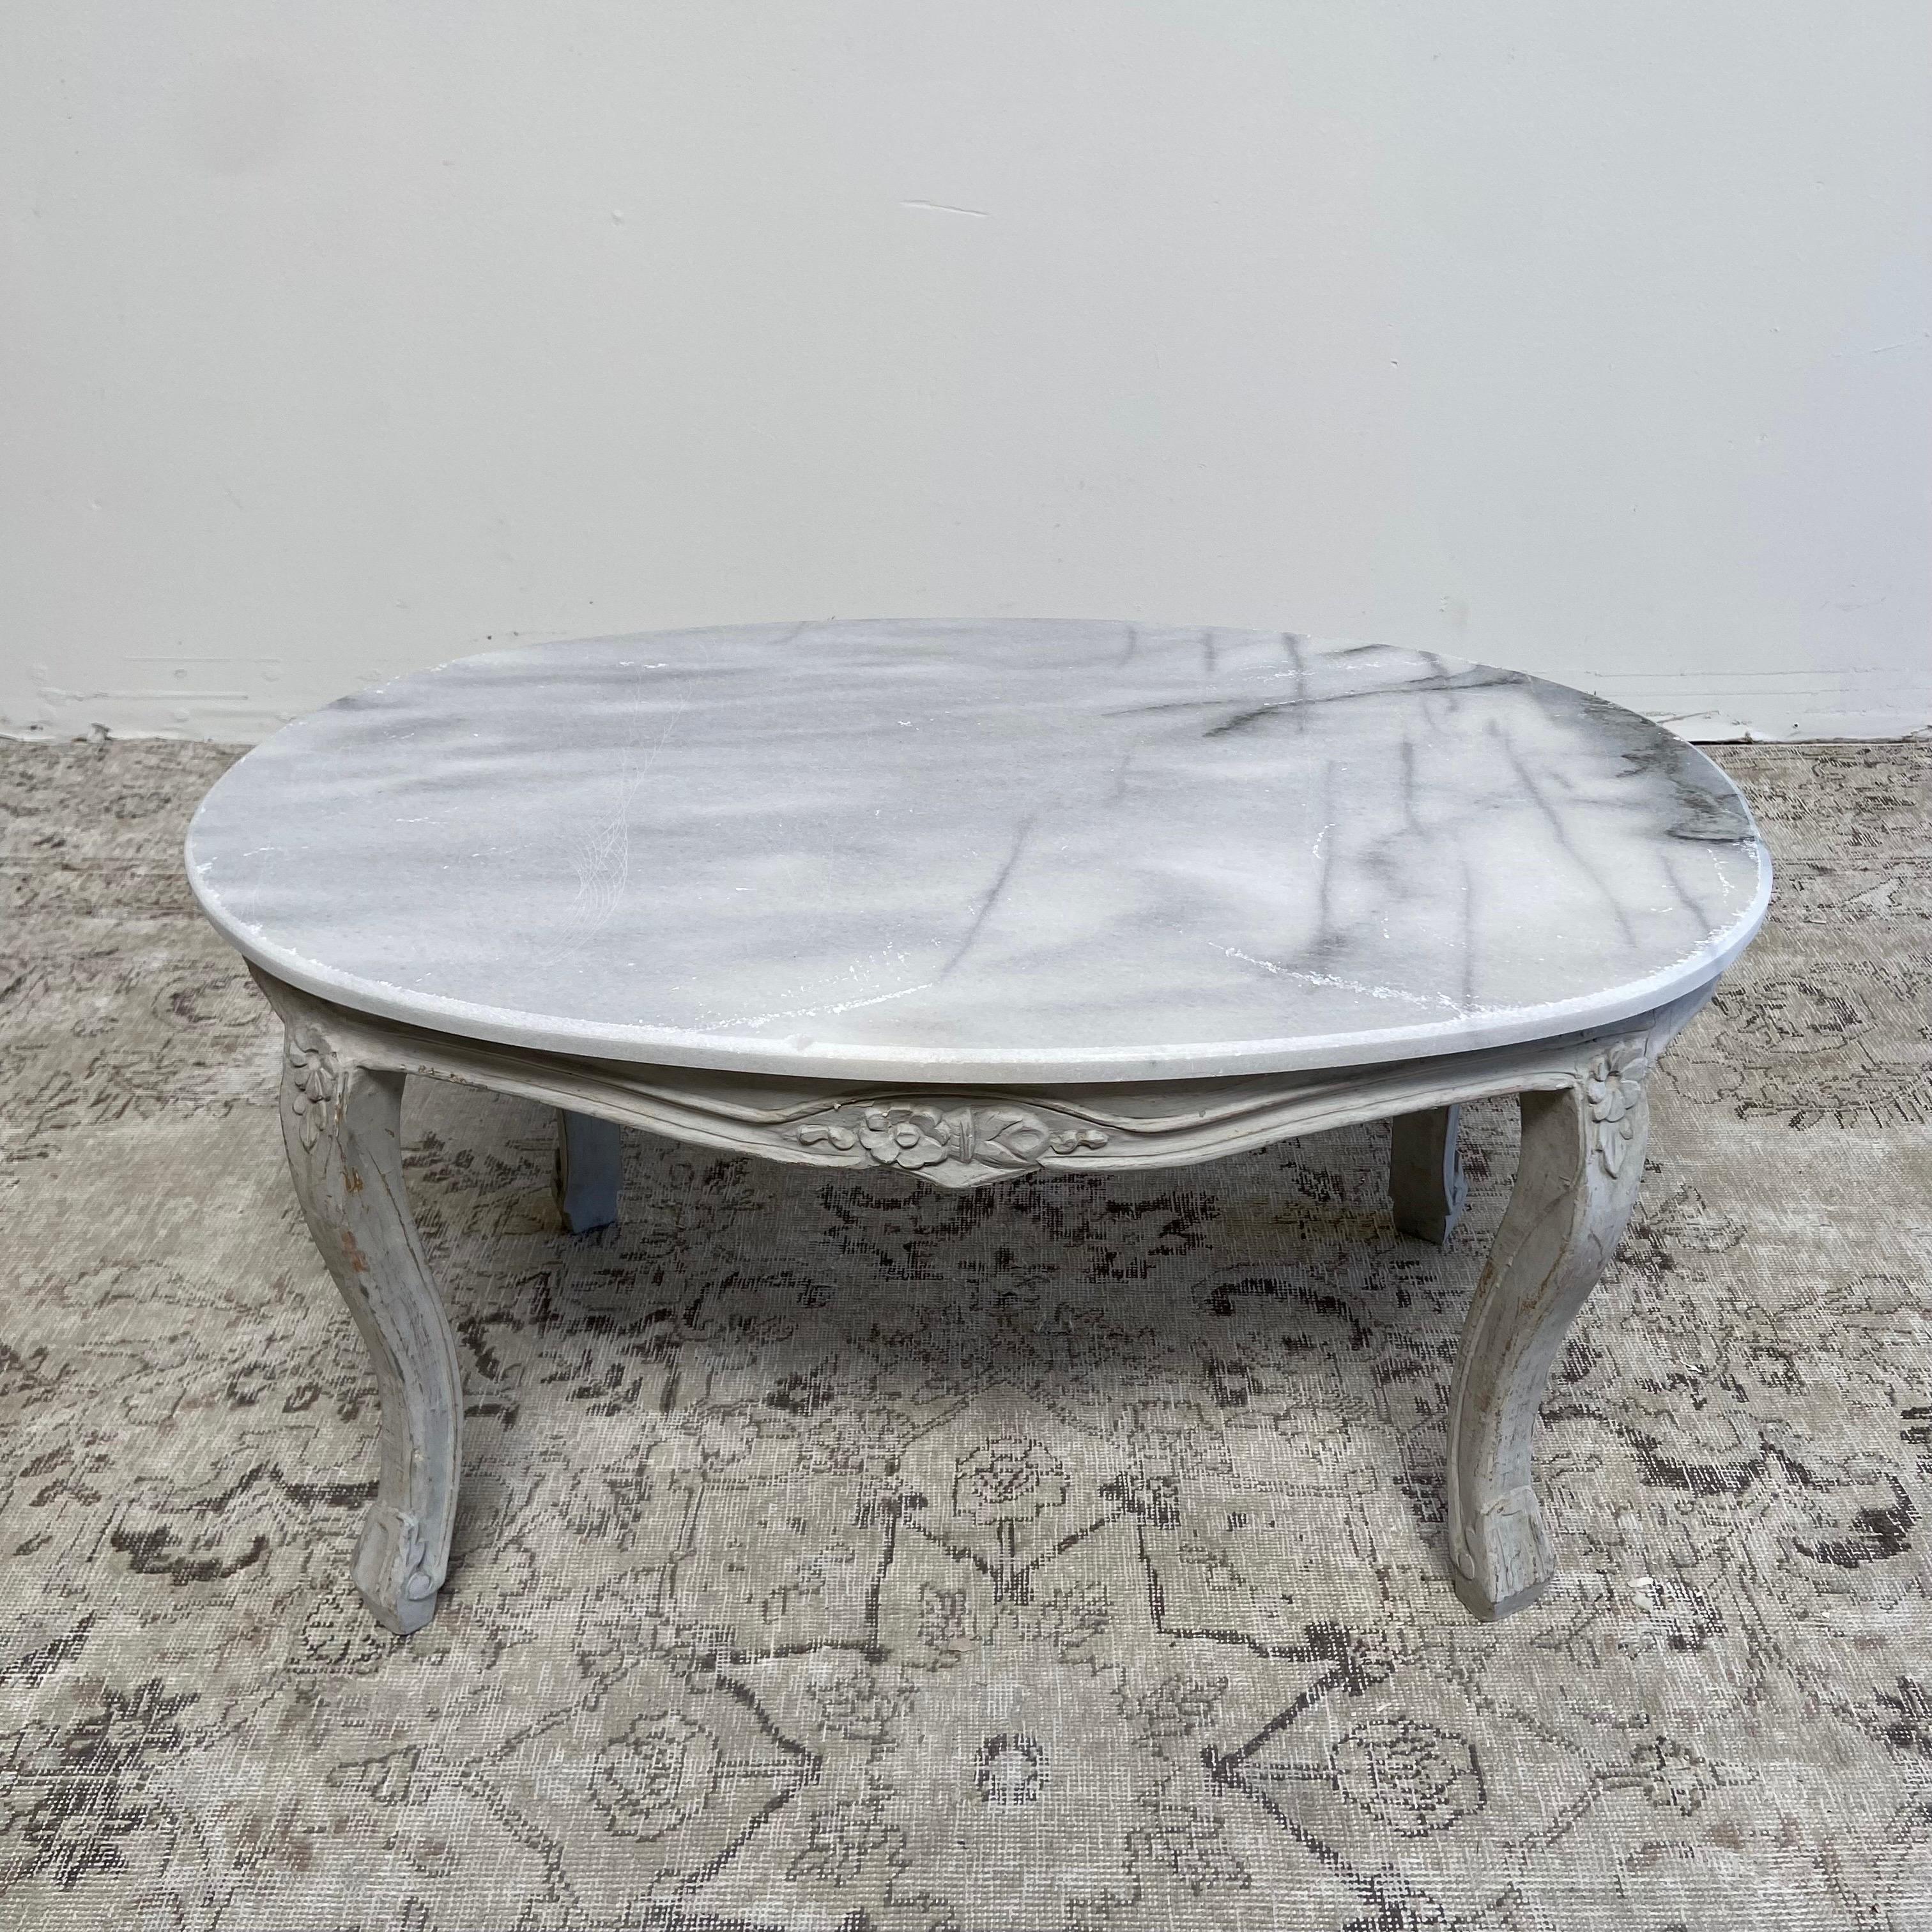 Vintage French style marble top coffee table.
Painted in a gustavian grey color, with subtle distressed edges and antique patina.
Legs are solid and sturdy, marble is not attached to the base.
Size: 35”W x 22”D x 18-1/2”H
Marble is a straight